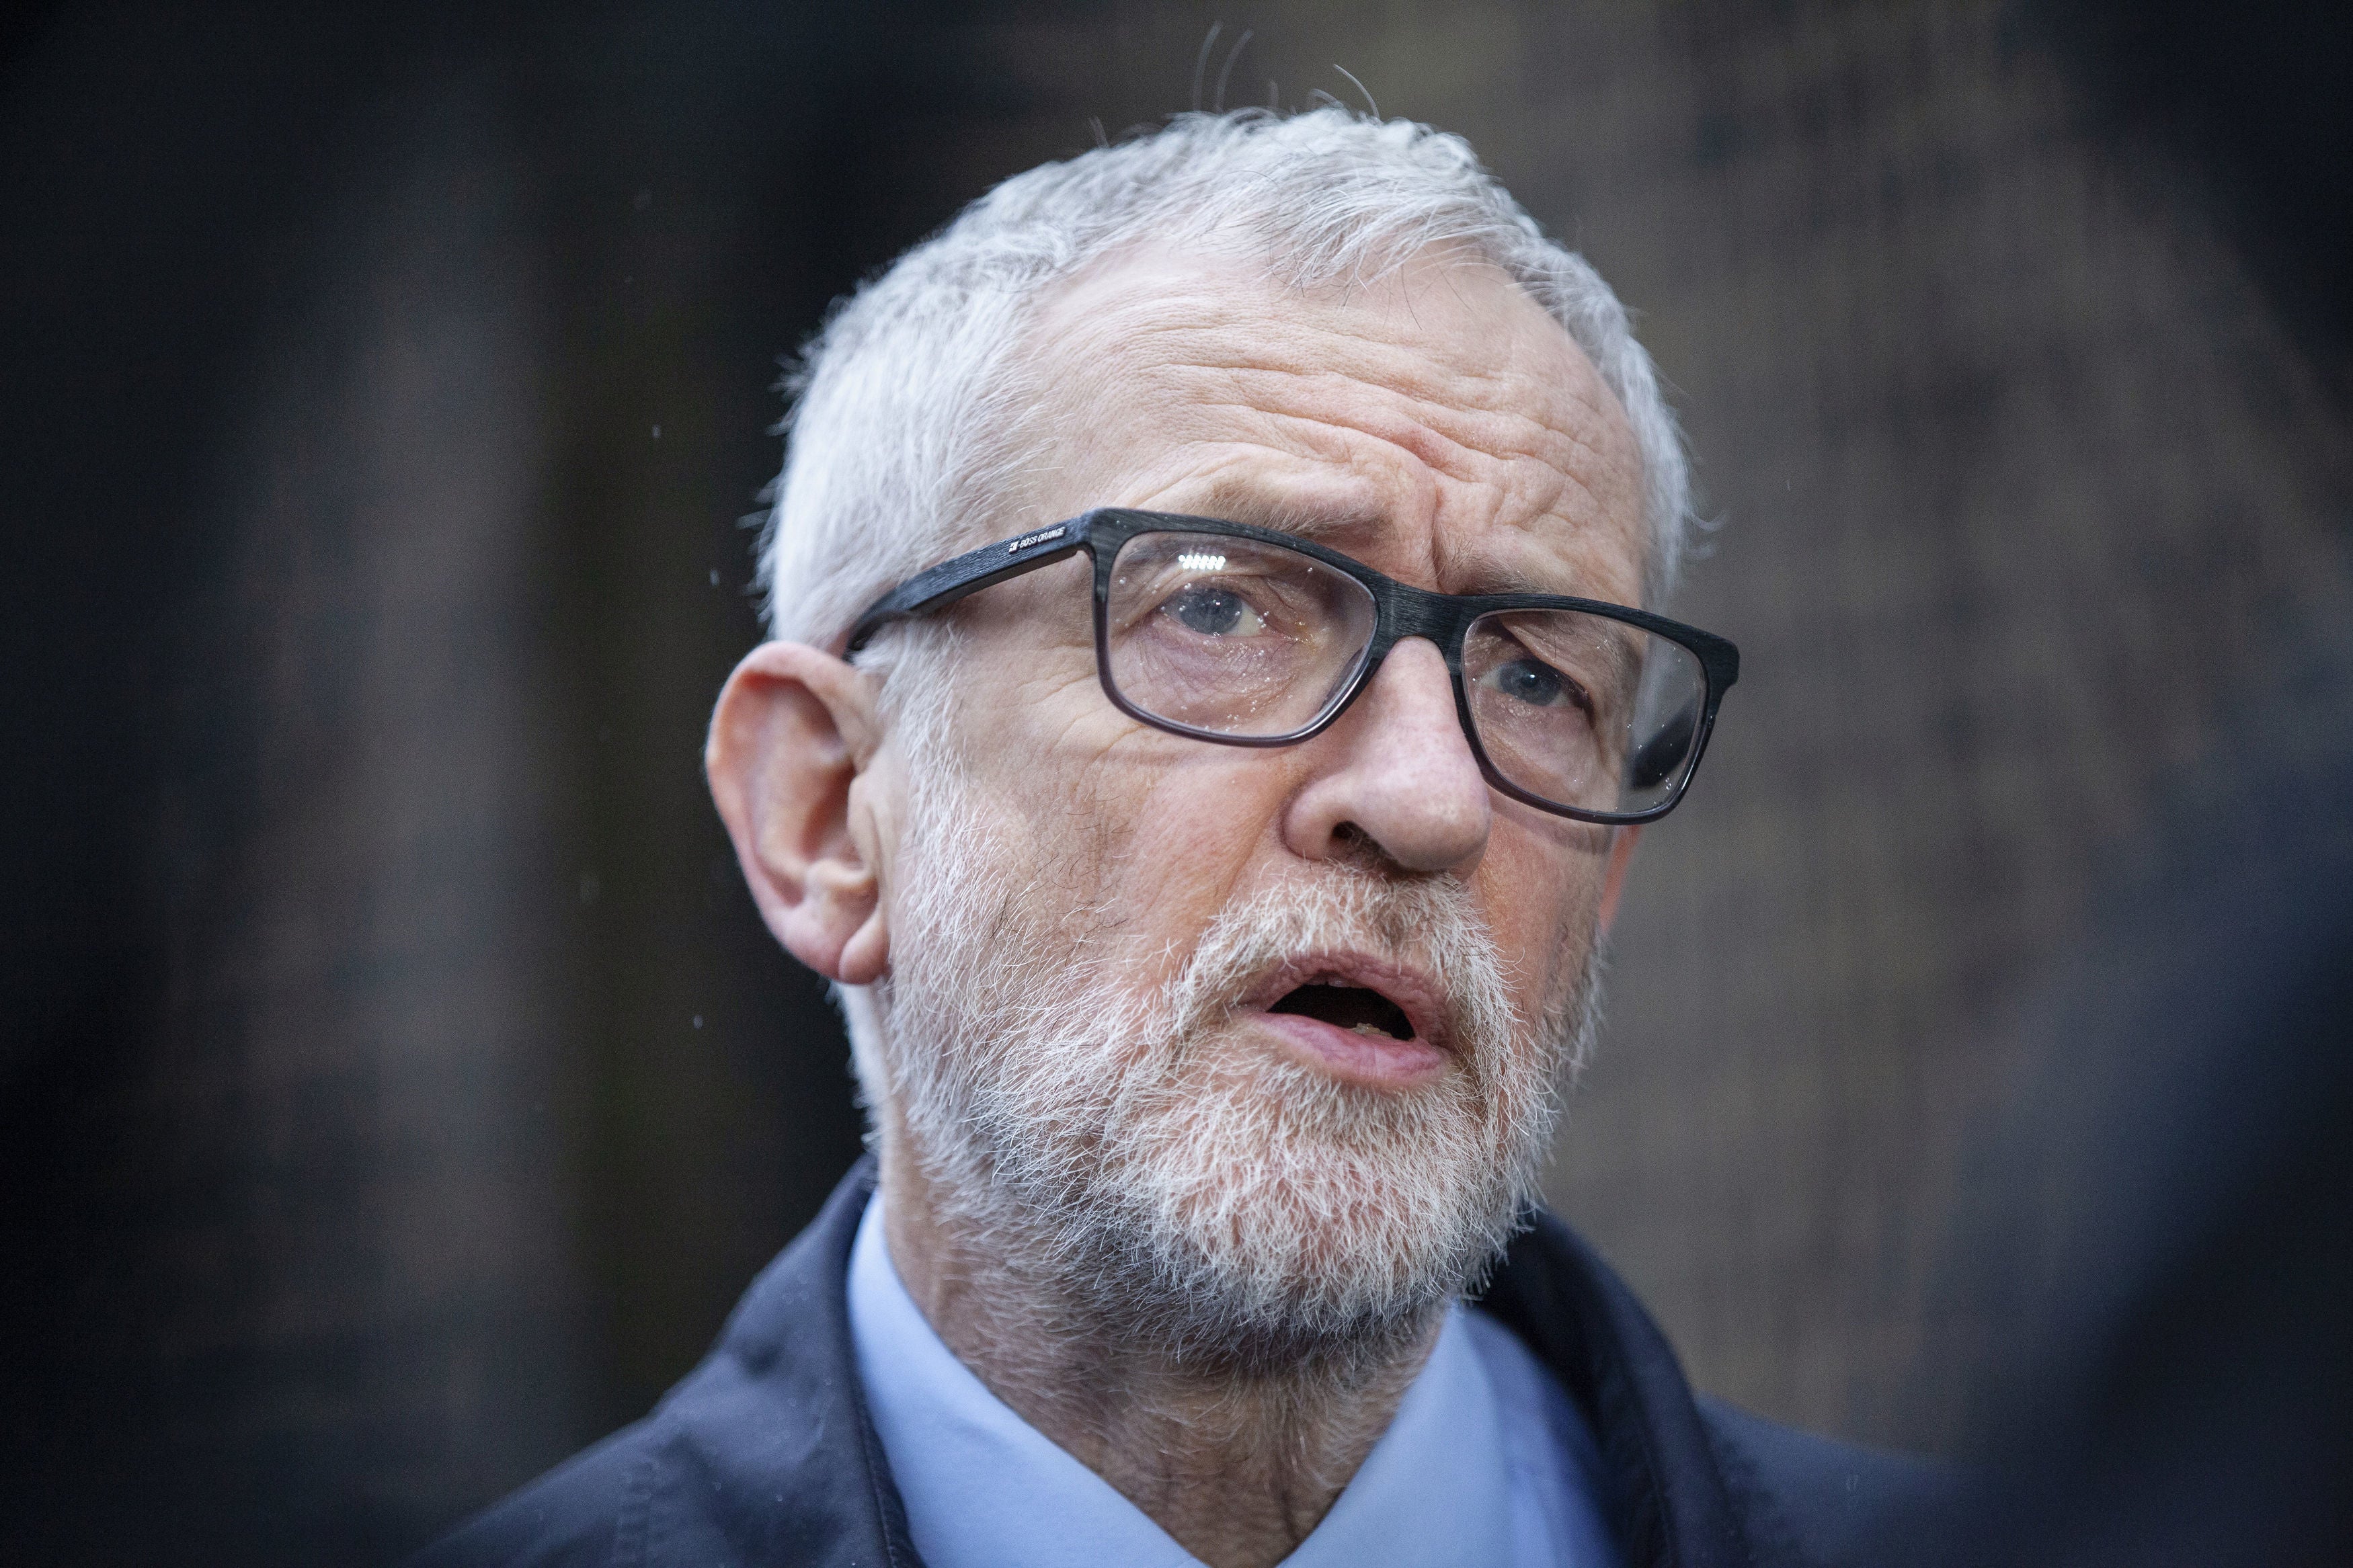 Jeremy Corbyn said in a statement this week that he was 'alarmed and distressed’ by the incident